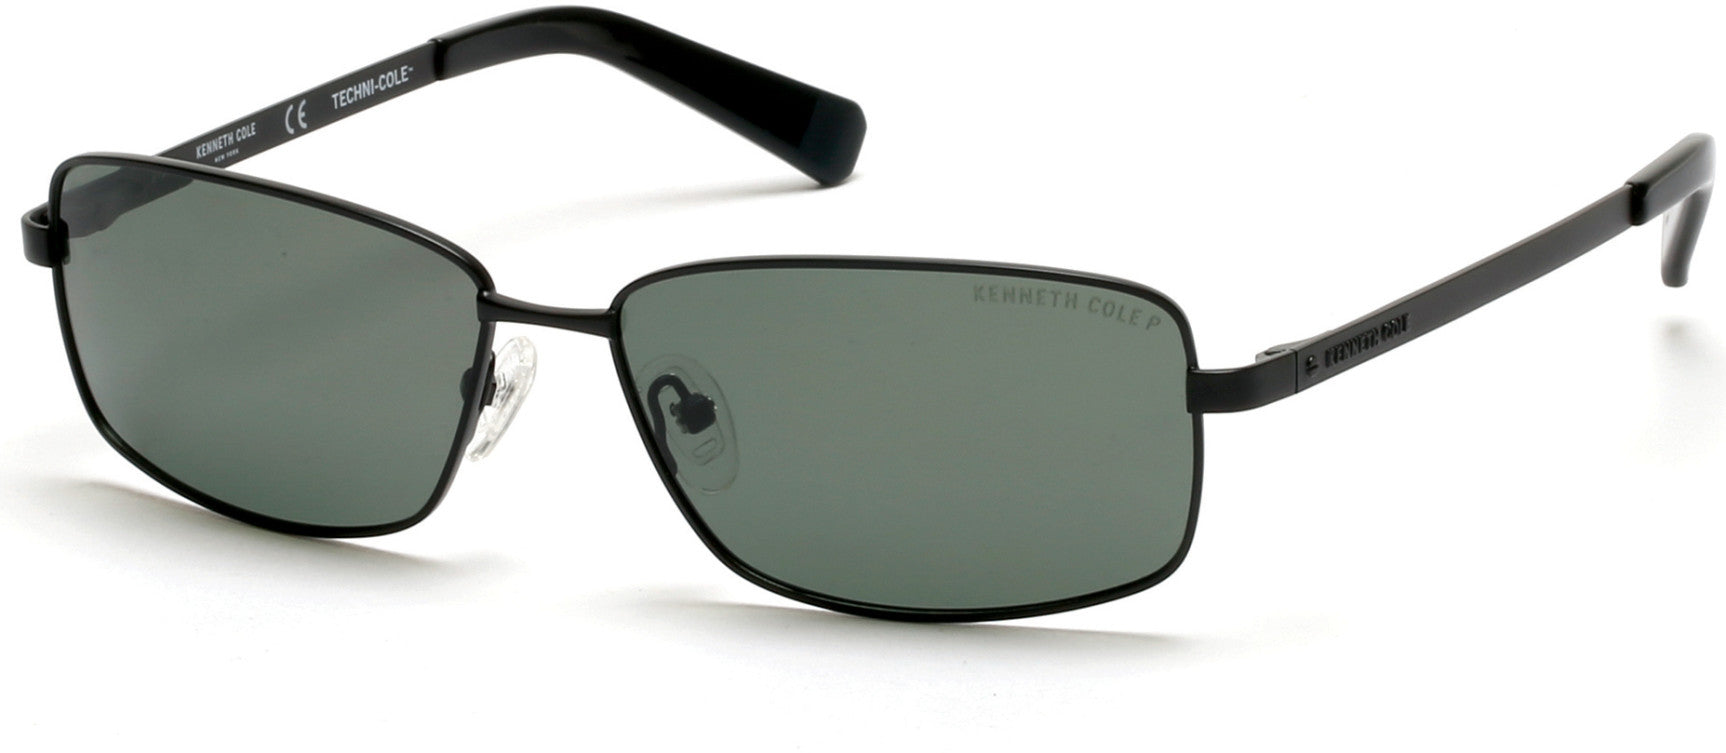 Kenneth Cole New York,Kenneth Cole Reaction KC7212 Sunglasses 02R-02R - Matte Black / Green Polarized